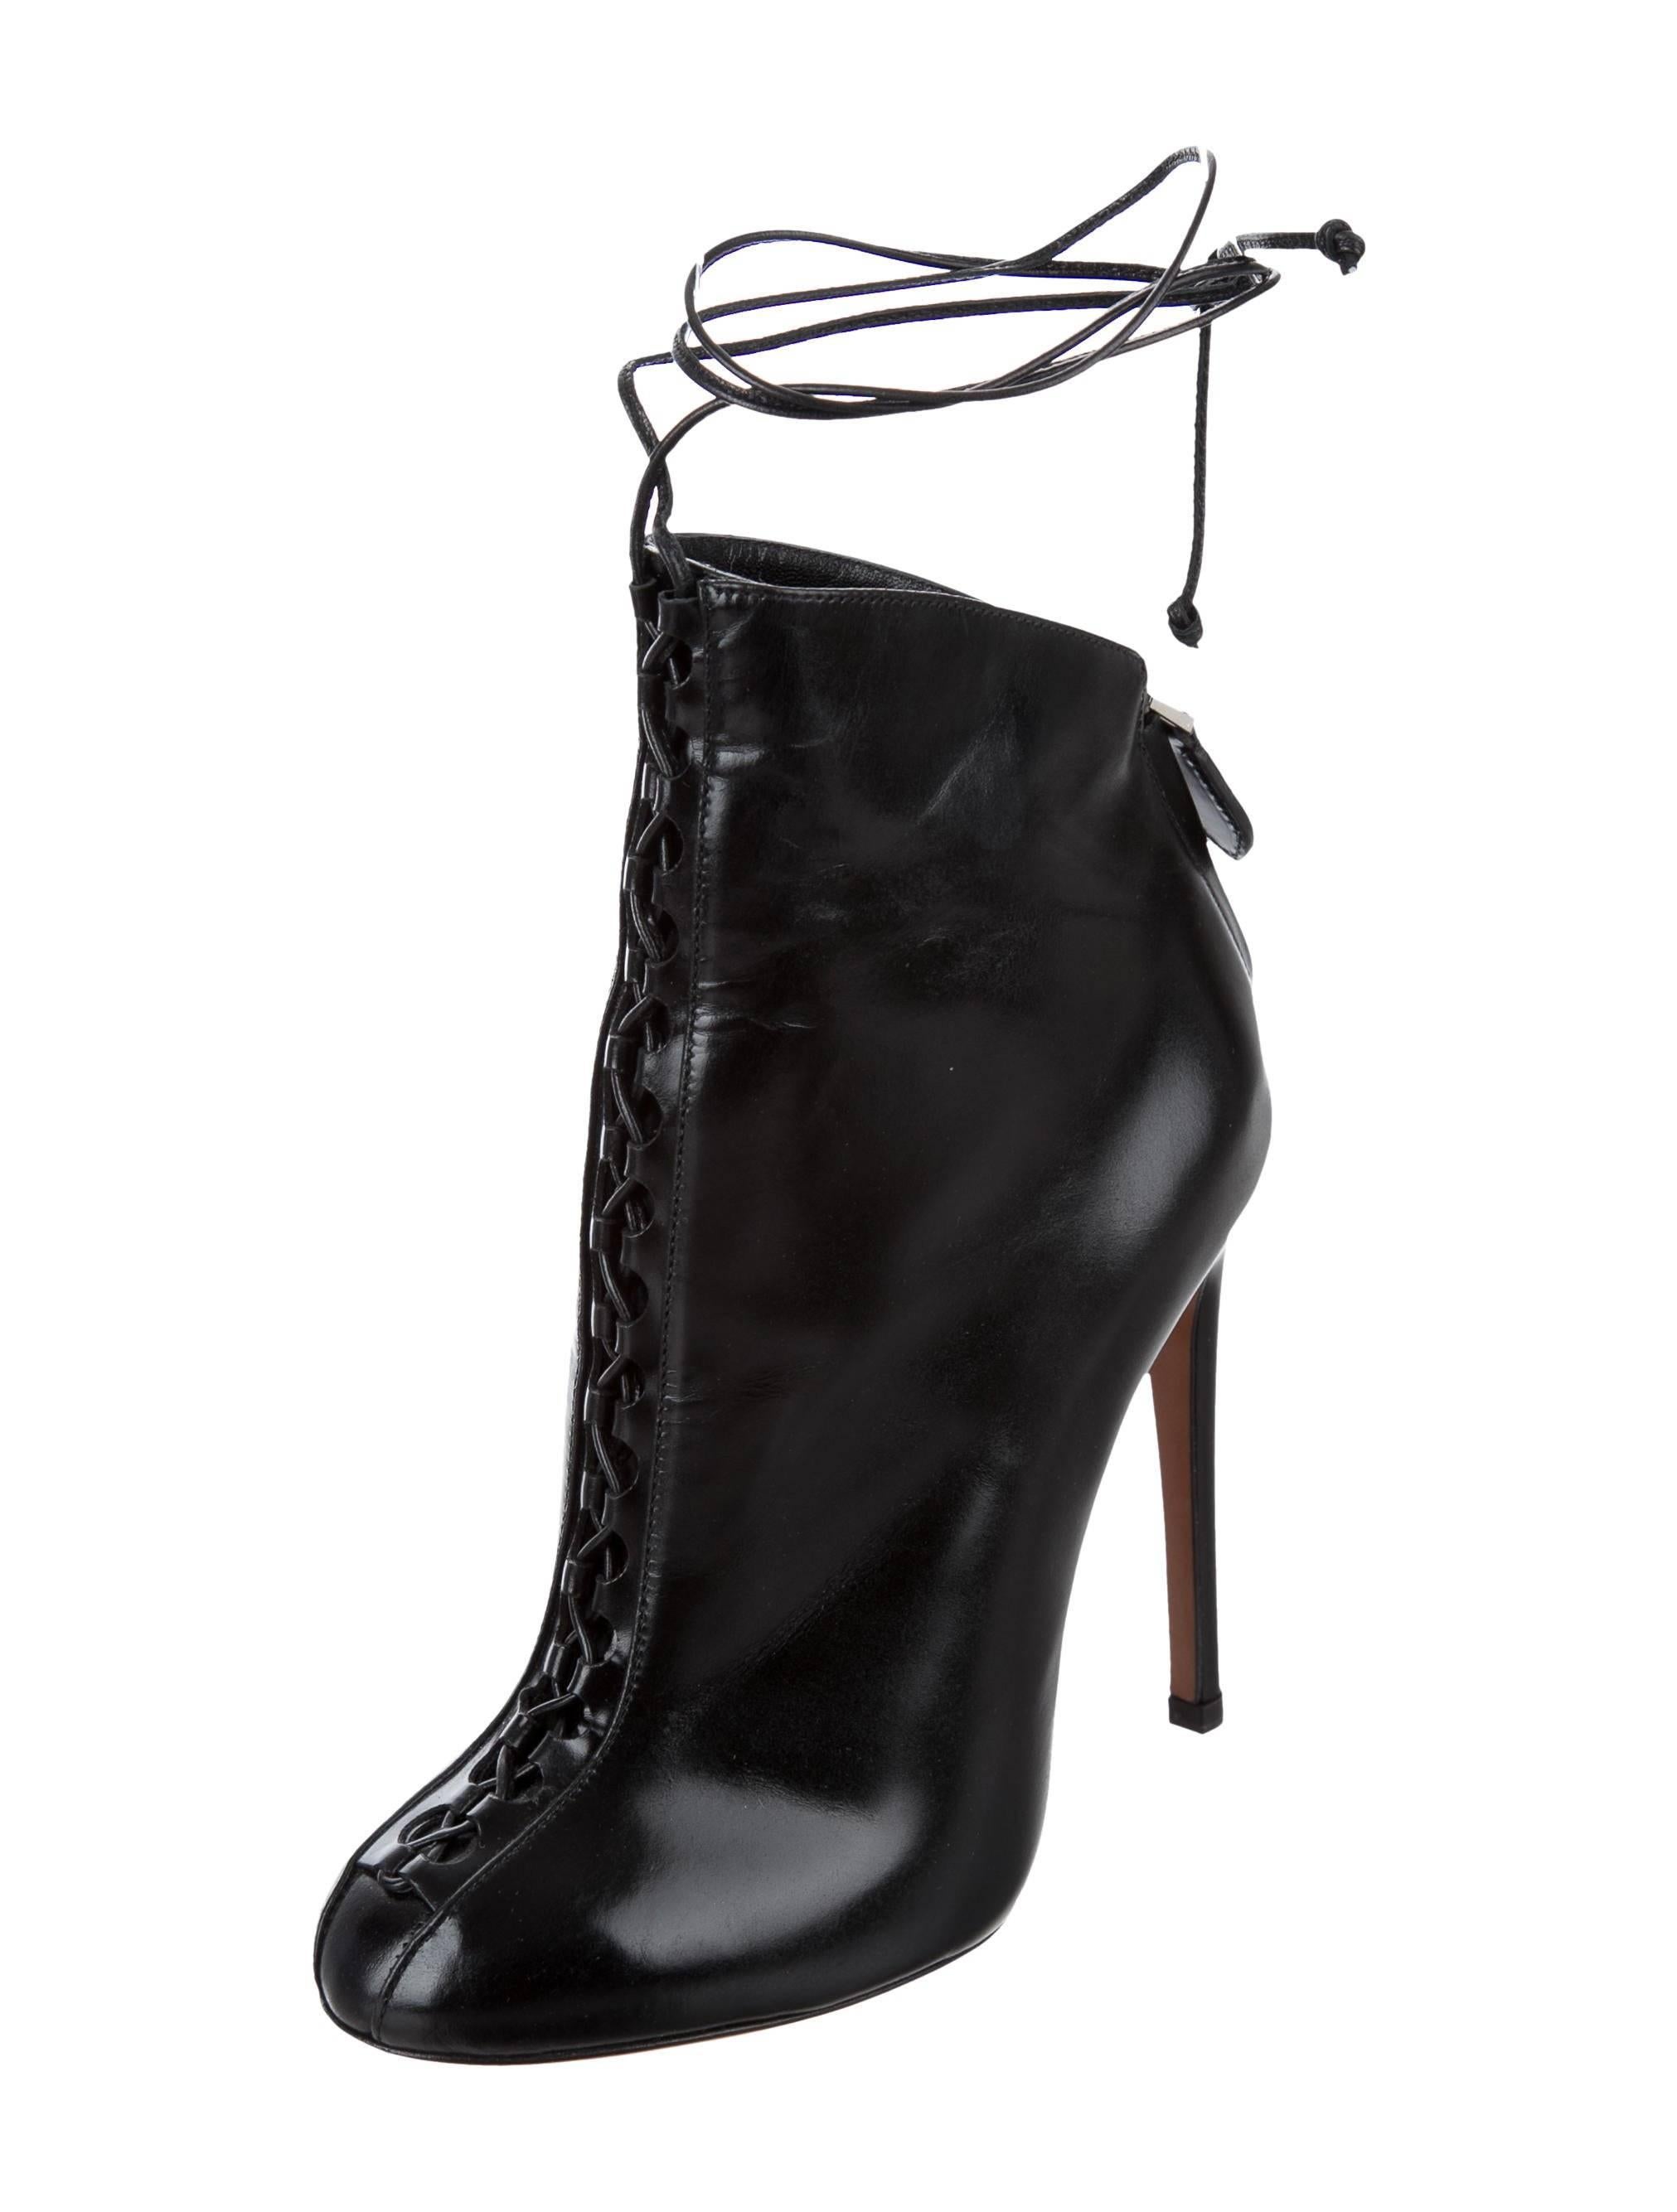 CURATOR'S NOTES

Alaia New Black Leather Lace Up Corset Ankle Booties Boots in Box 

Size IT 36 - Our only pair!
Leather
Lace up and zip closure
Made in Italy
Heel height 4.5"
Includes original Alaia dust bag and box 